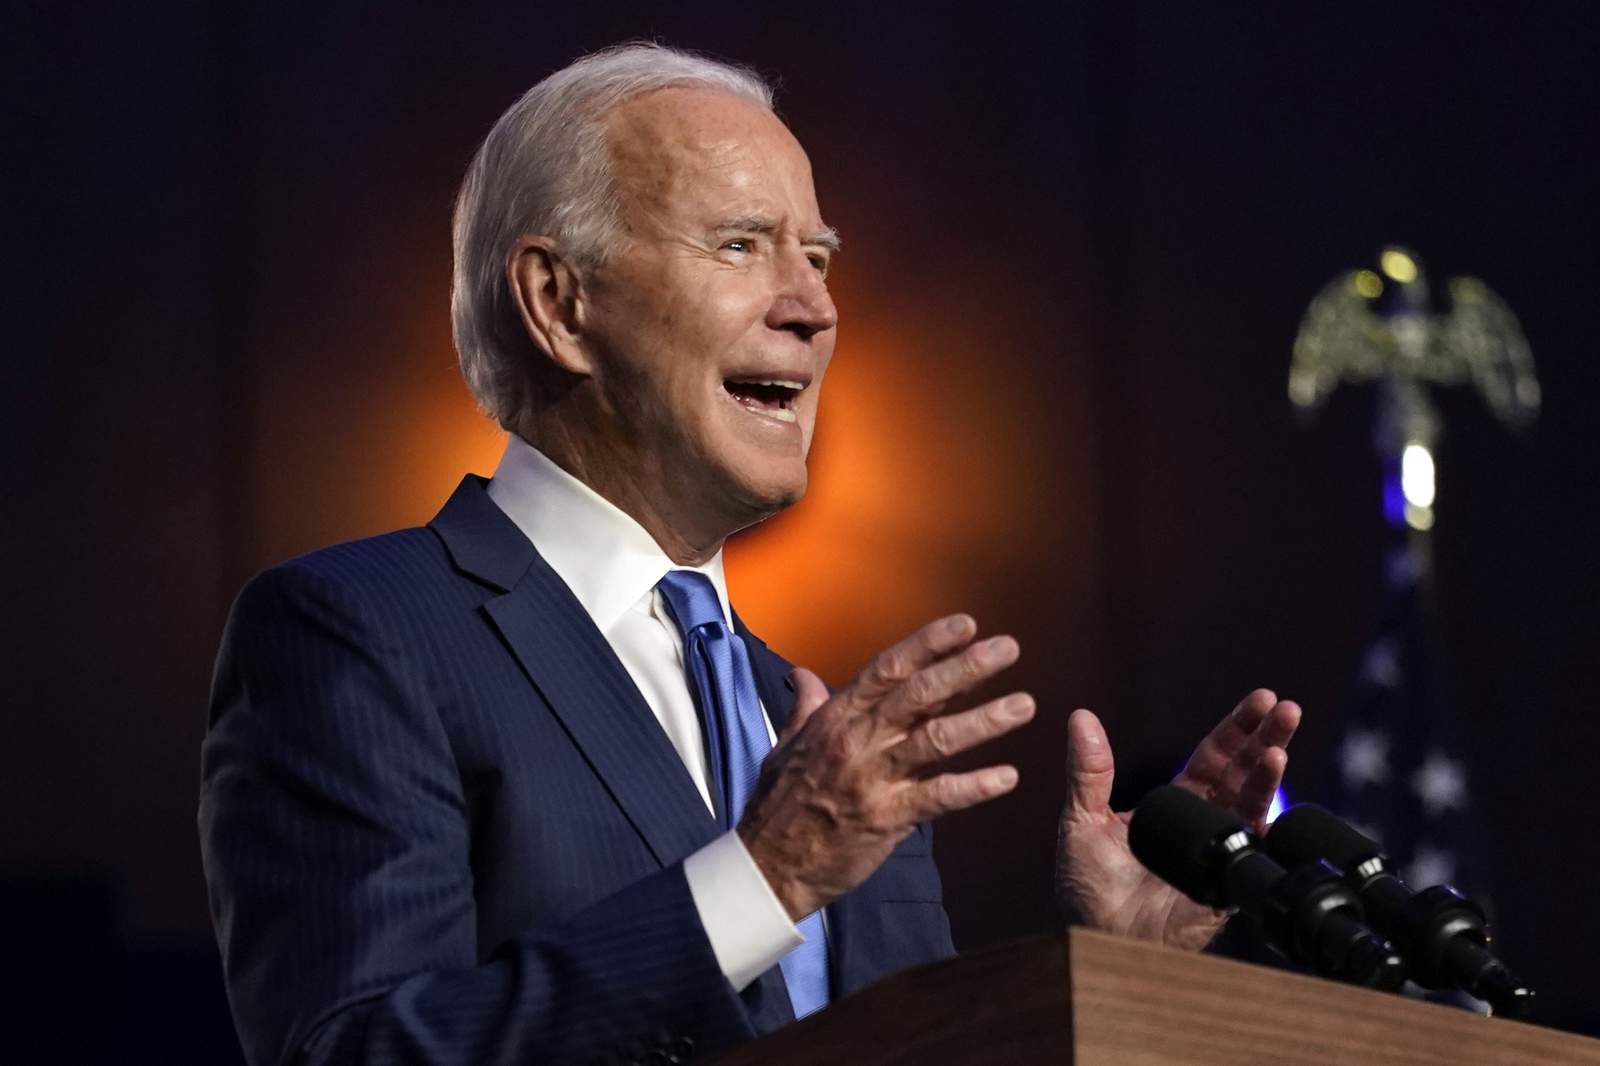 Biden expected to speak Friday night in primetime as vote counts continue